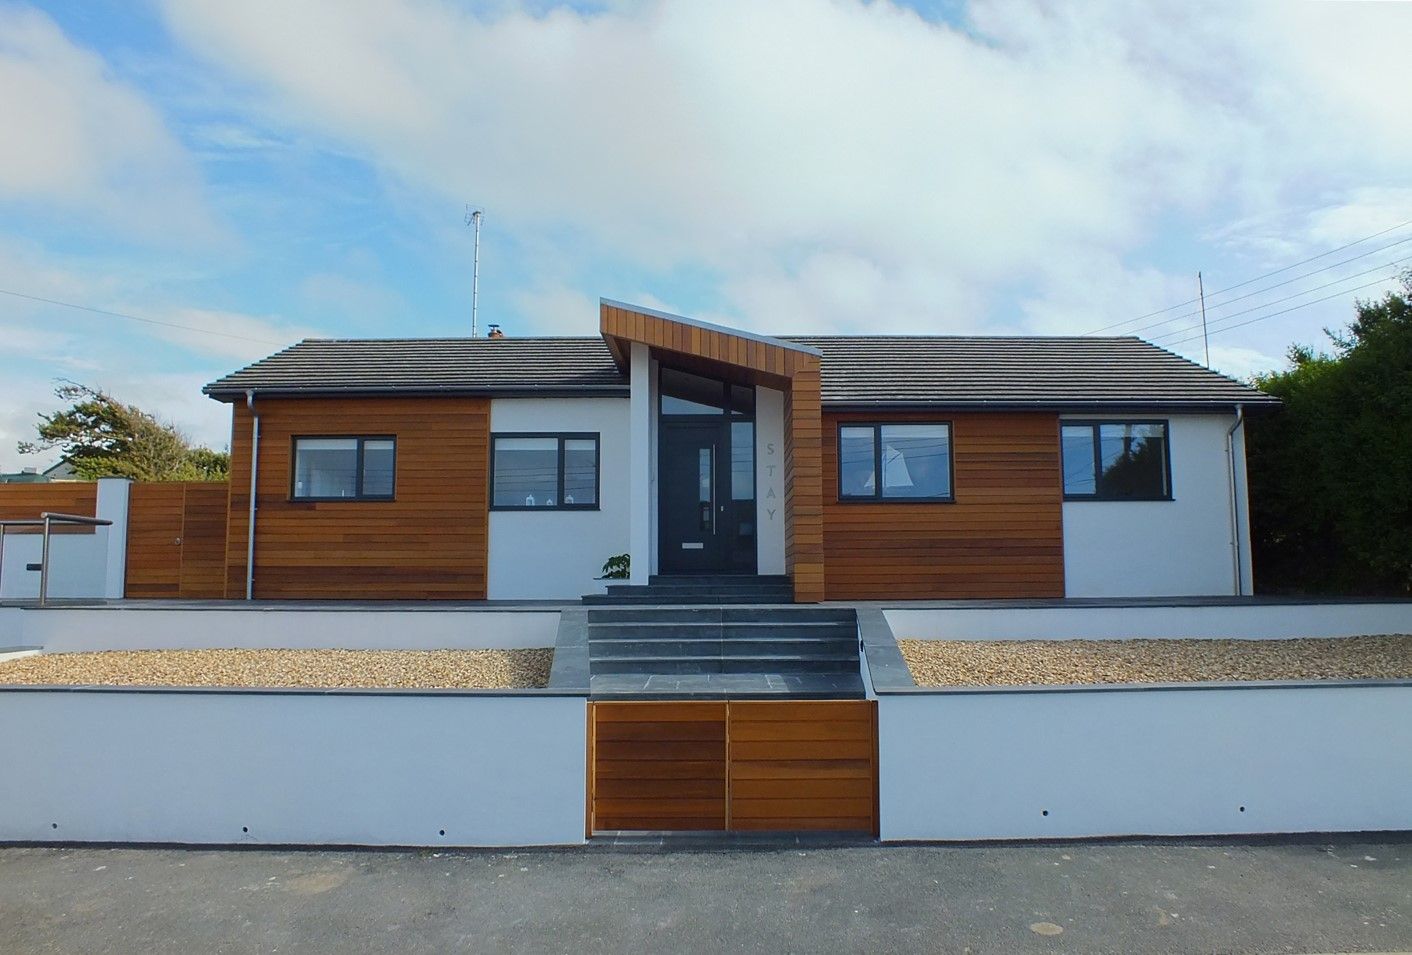 Stay House Remodel, Widemouth Bay, Cornwall homify Moderne Häuser